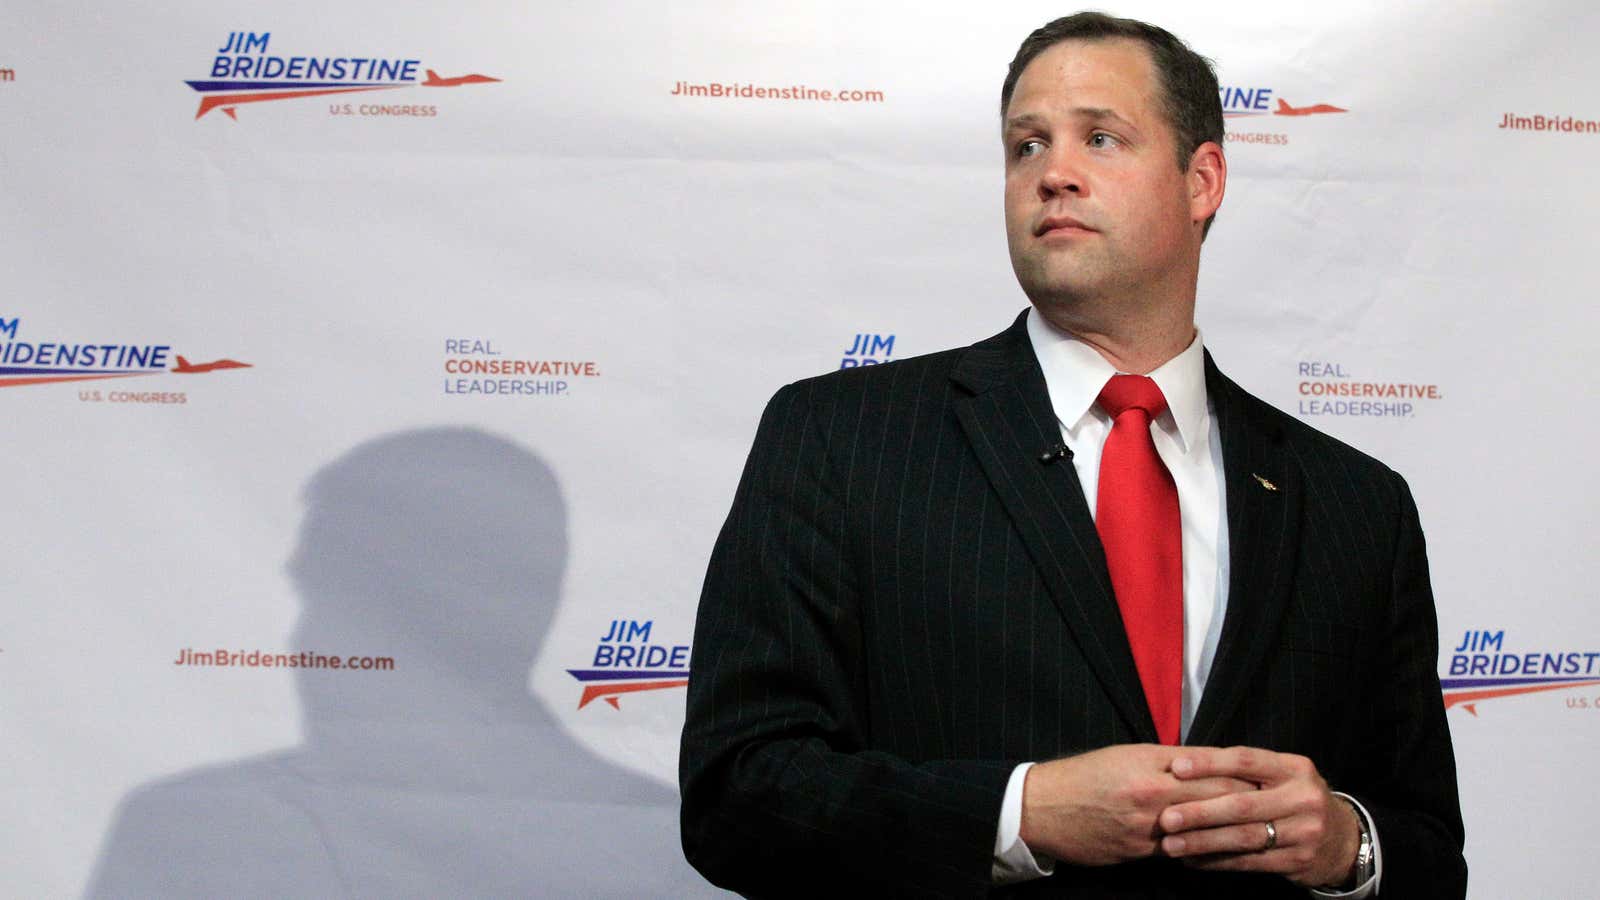 Rep. Jim Bridenstine wants to talk about space, not his previous political campaigns.